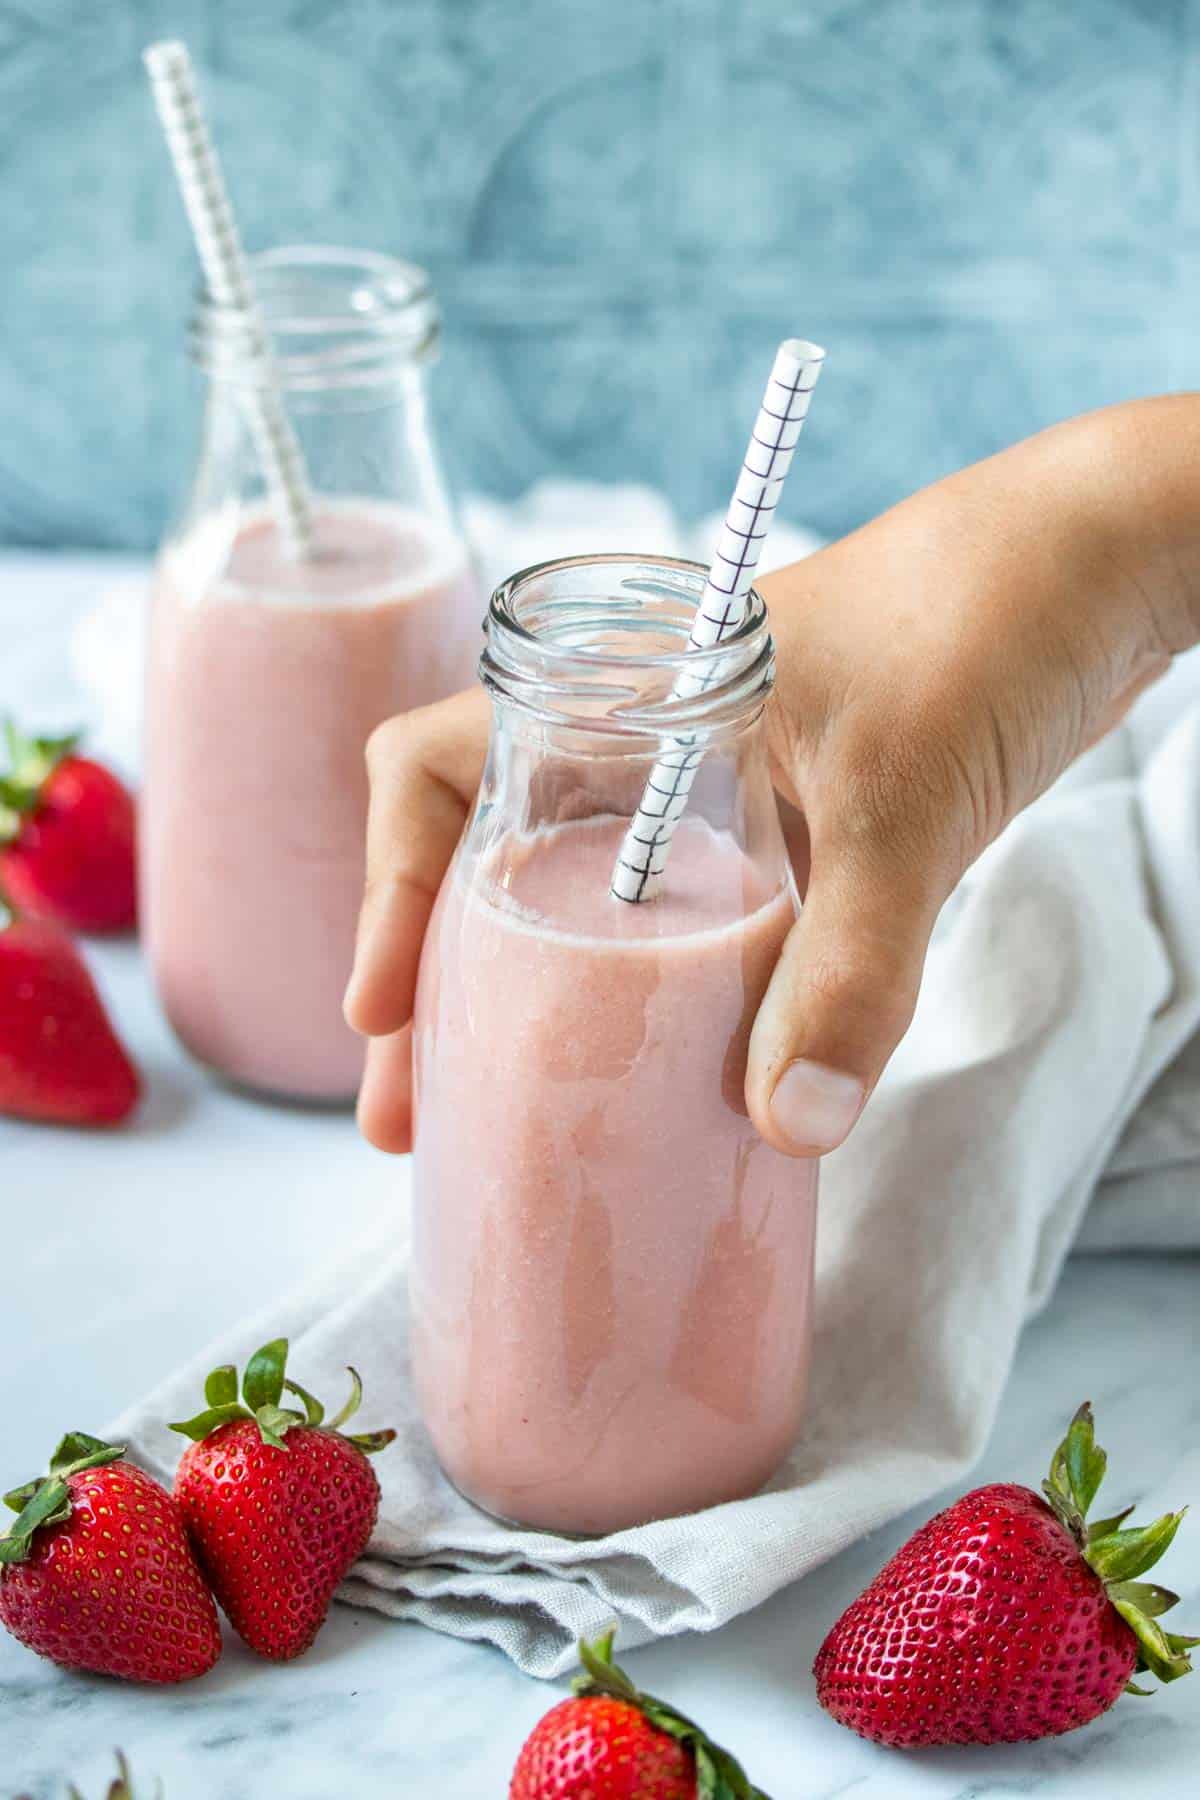 A hand holding a milk jar filled with a pink milk on a light colored towel with strawberries on it